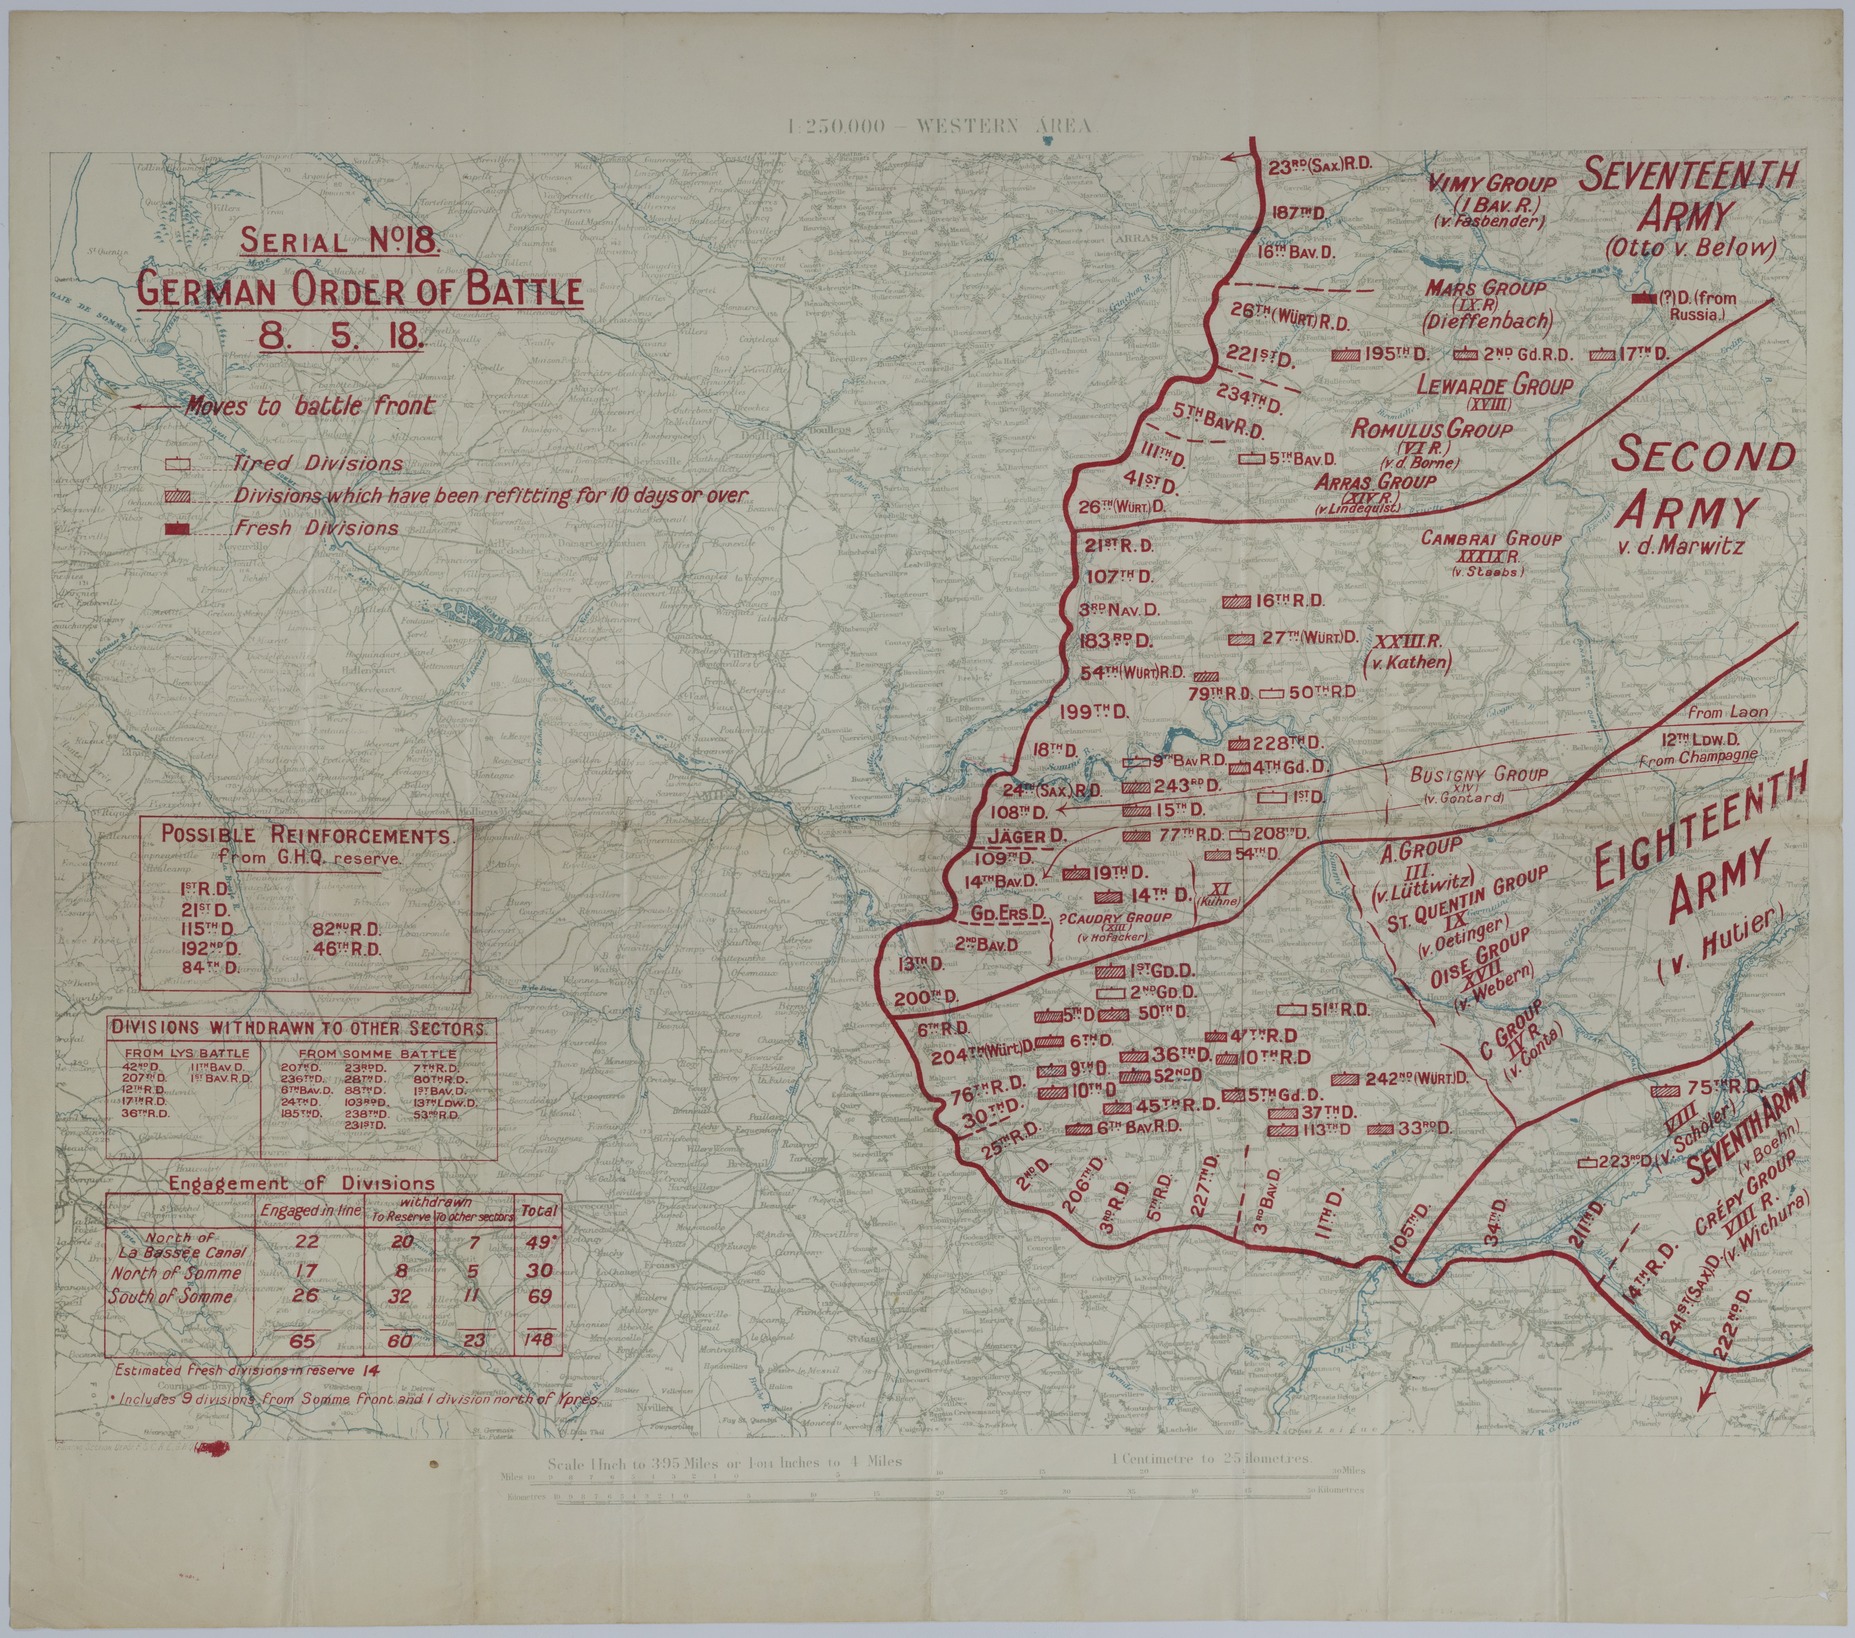 Map of the Positions and Movement of German Divisions During the Spring Offensive